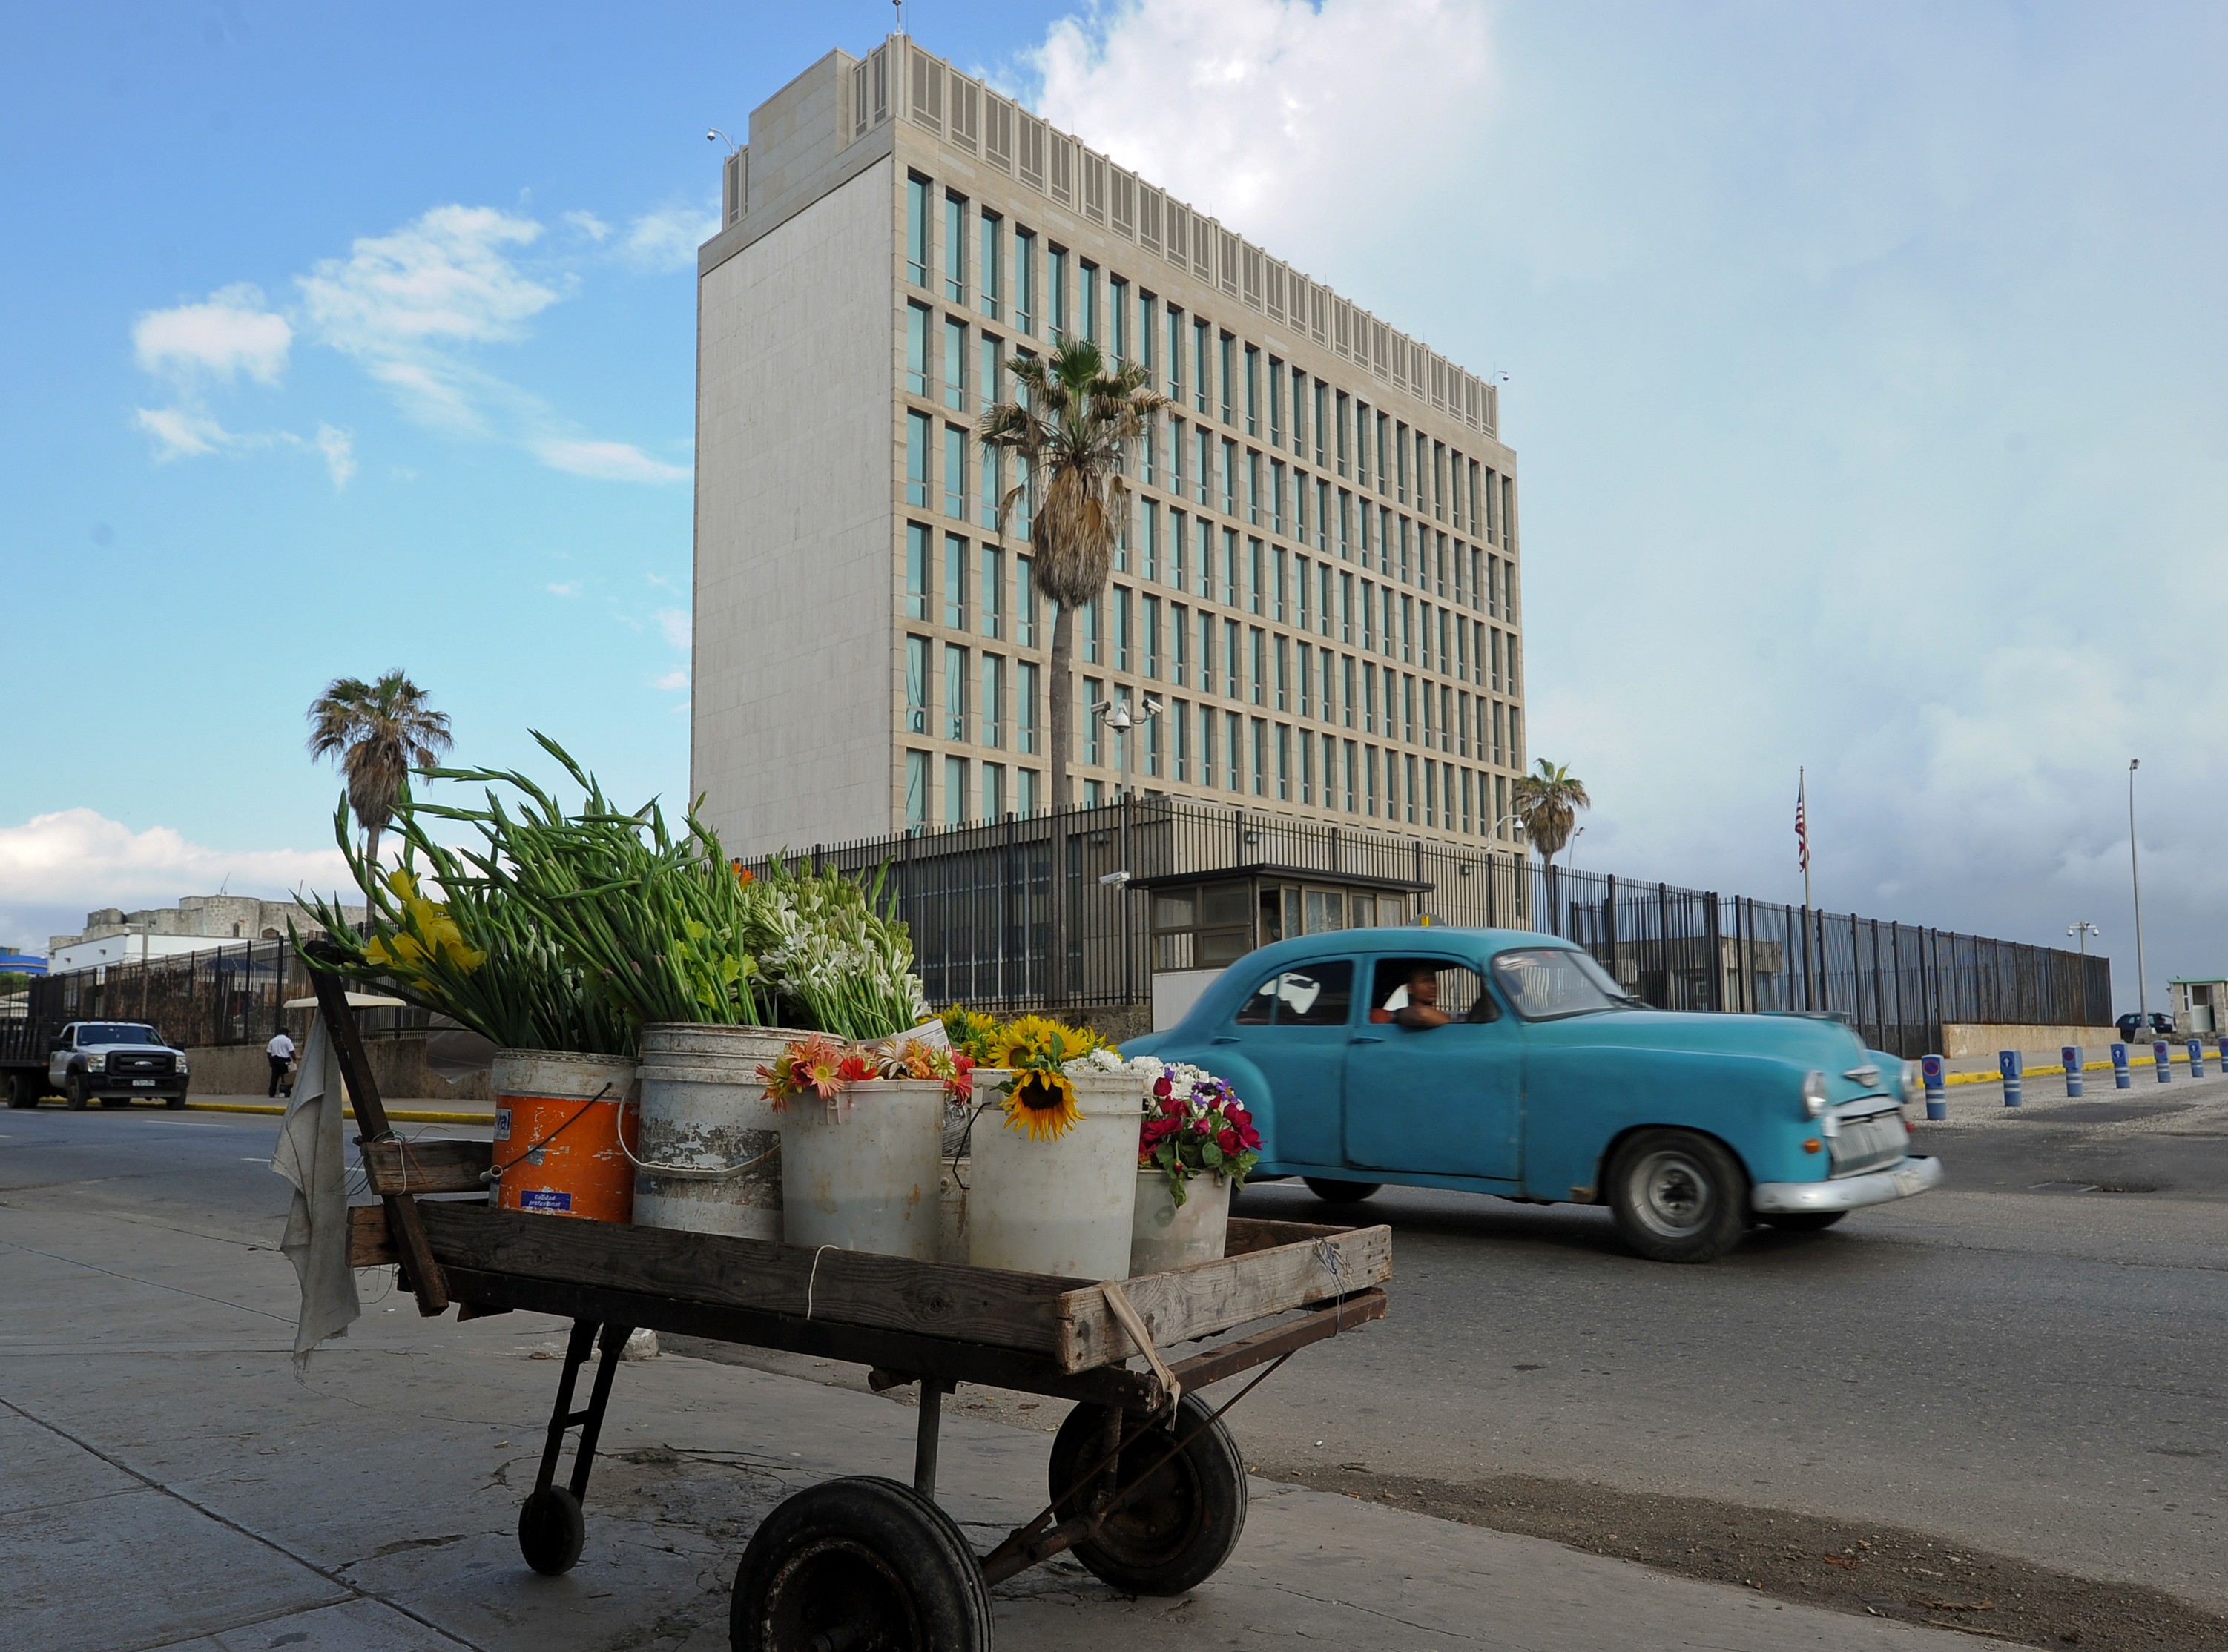 US To Resume Some Visa Services In Cuba After 4-Year Break